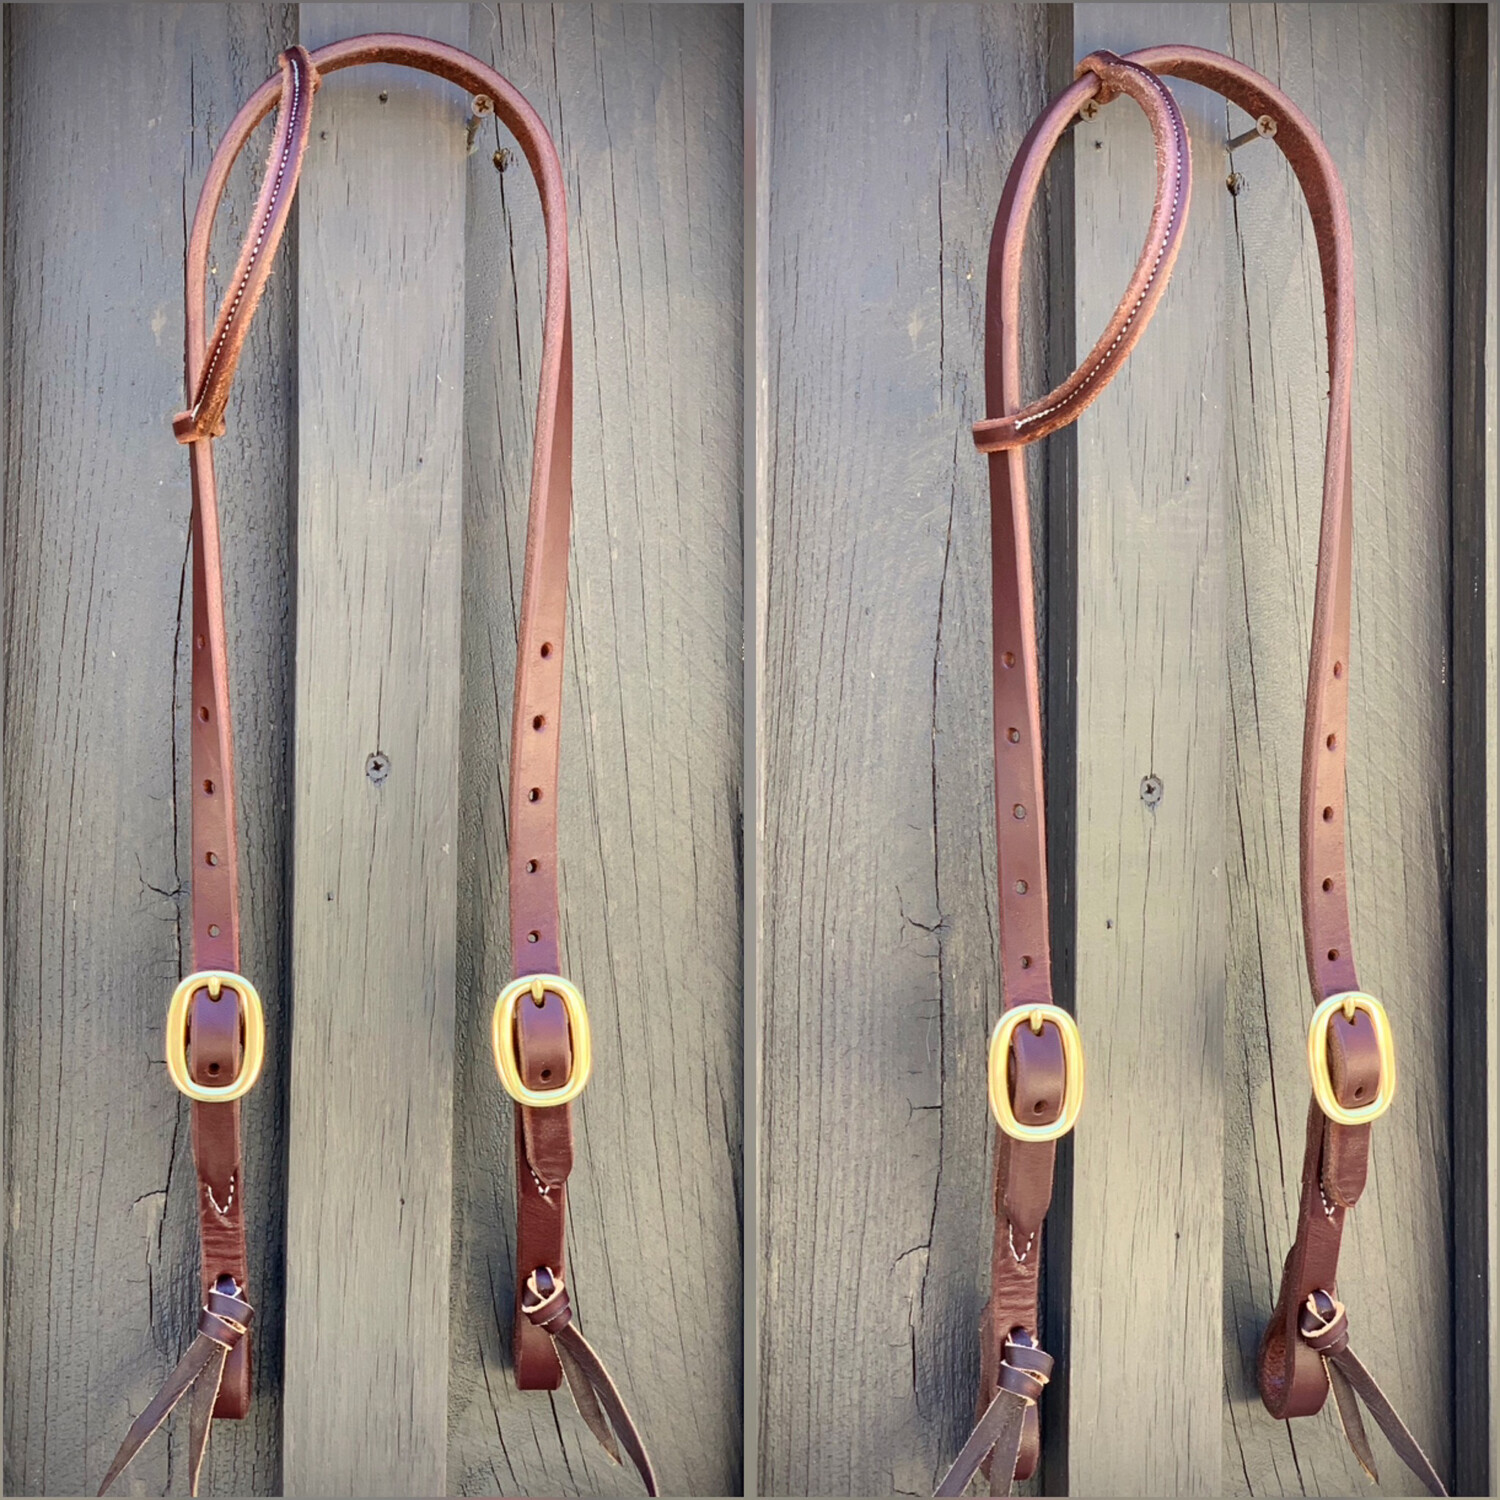 Double Brass Buckle One Ear Headstall 5/8" Oiled Harness Leather with Tie Ends